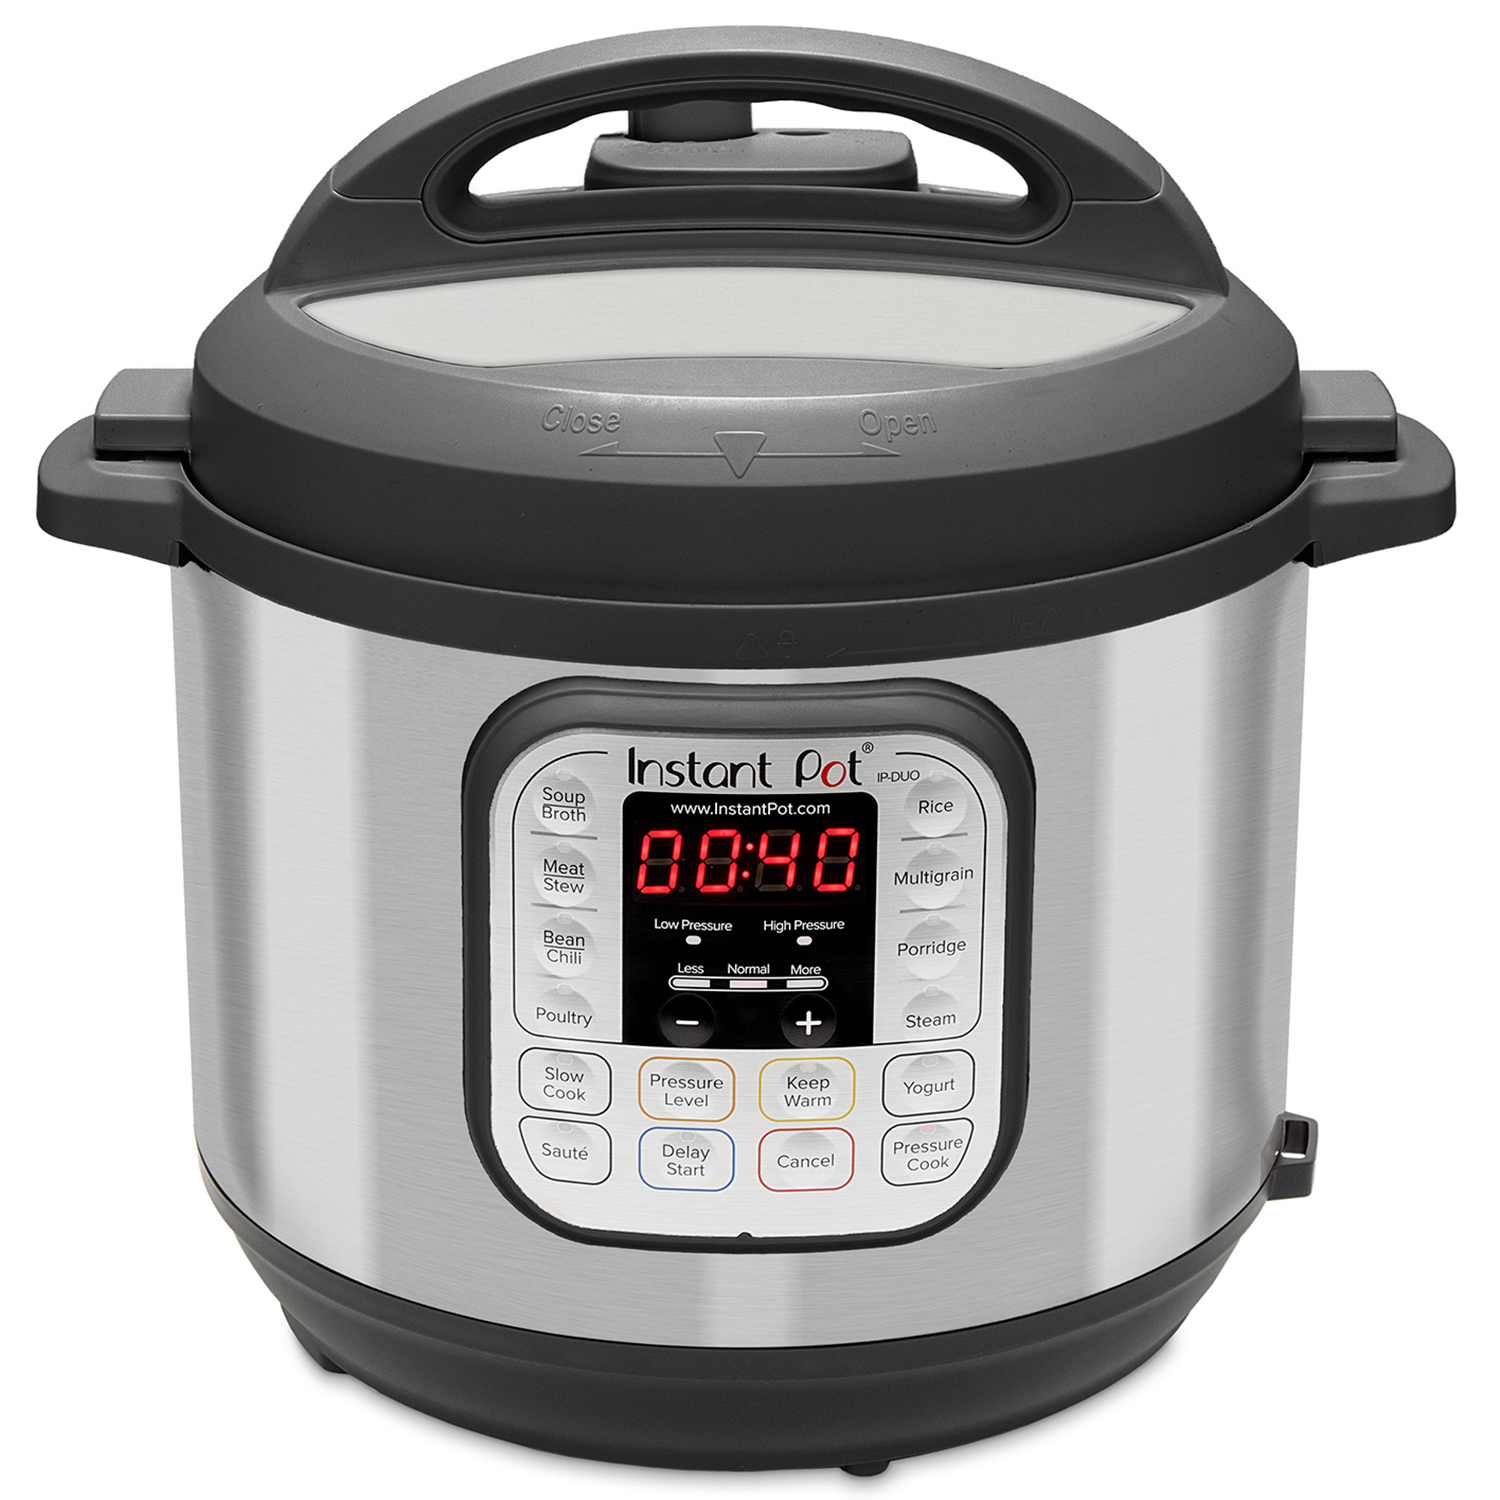 Instant Pot DUO80 8-Quart 7-in-1 Multi-Use Programmable Pressure Cooker, Slow Cooker, Rice Cooker, Sauté, Steamer, Yogurt Maker and Warmer